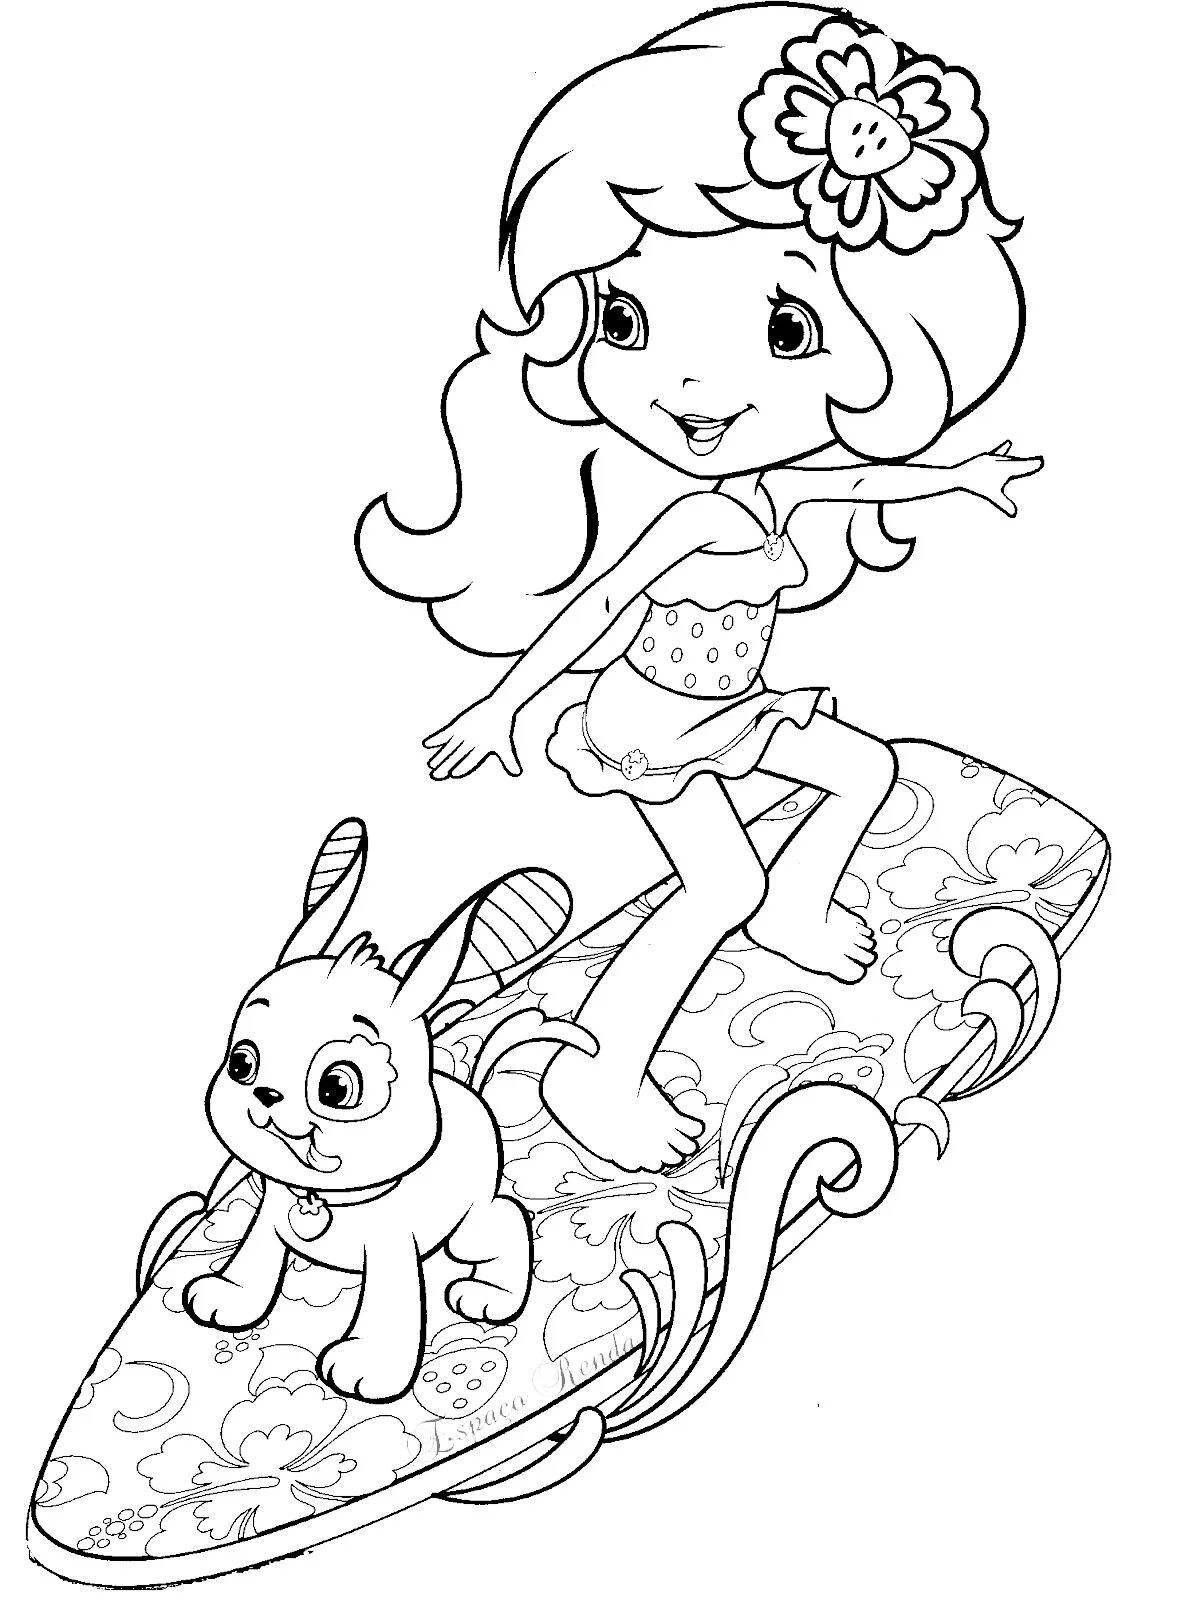 Squishy coloring page bunny doll